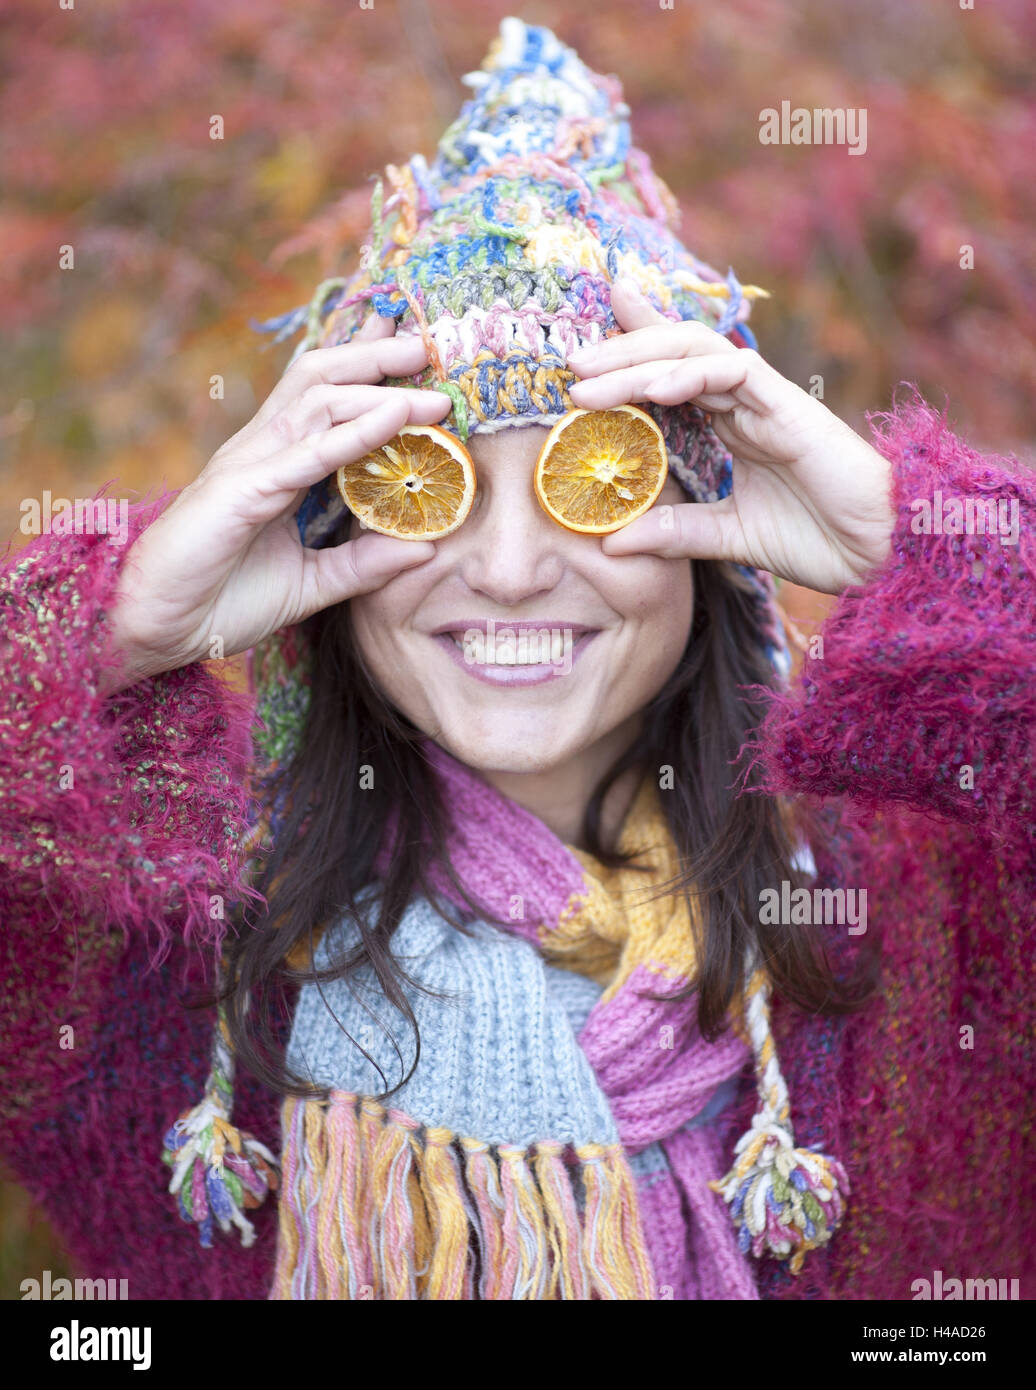 Woman with cardigan, cap and scarf holds slices of orange before the eyes, portrait, Stock Photo